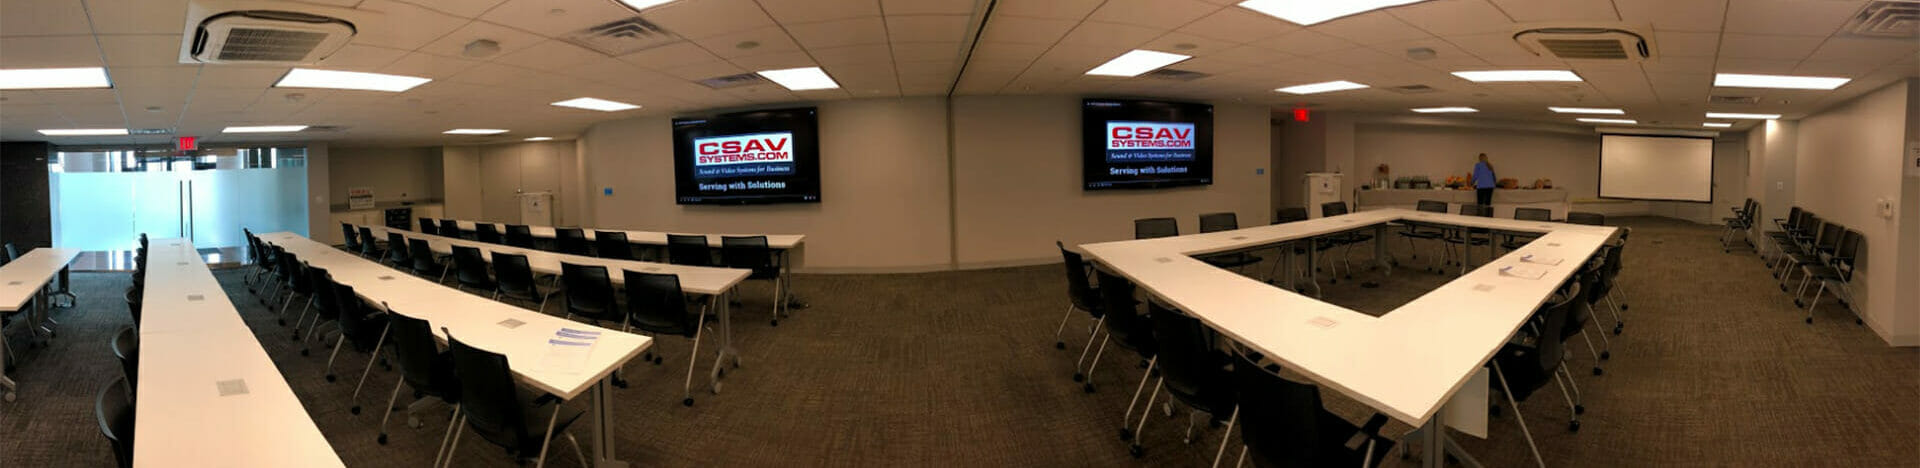 conference room audiovisual solutions